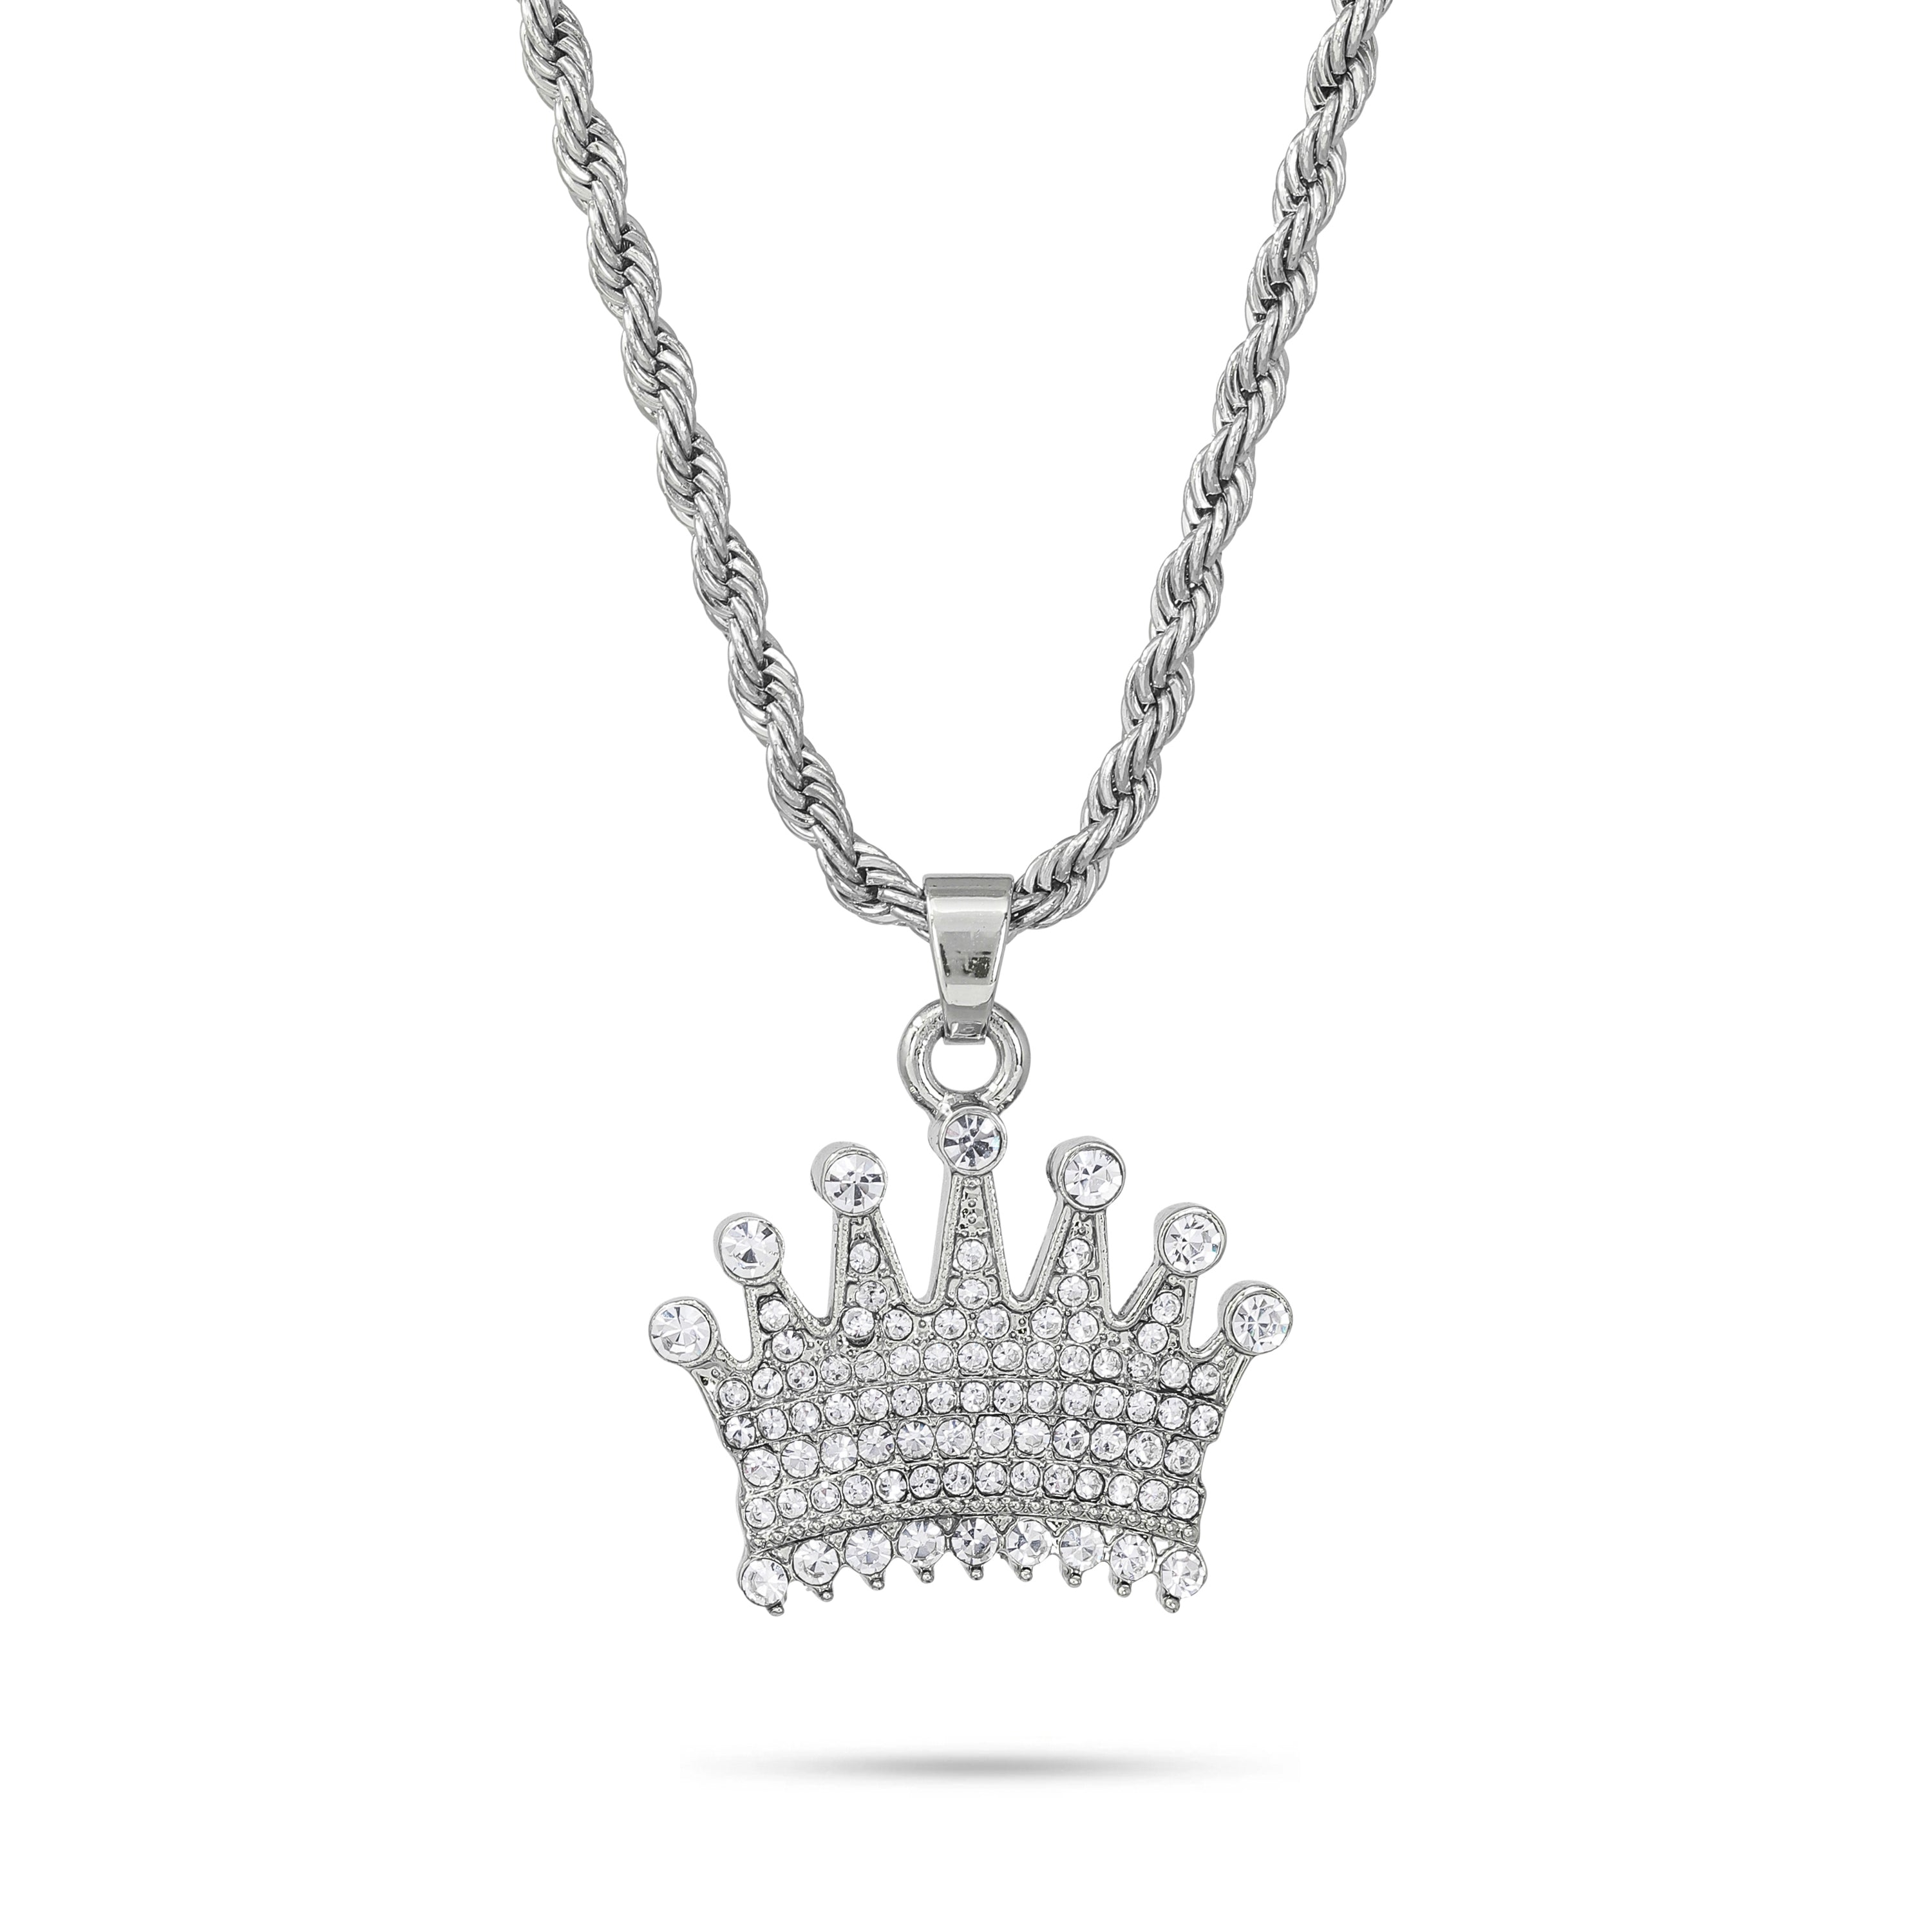 MINI ICED CROWN NECKLACE SILVER